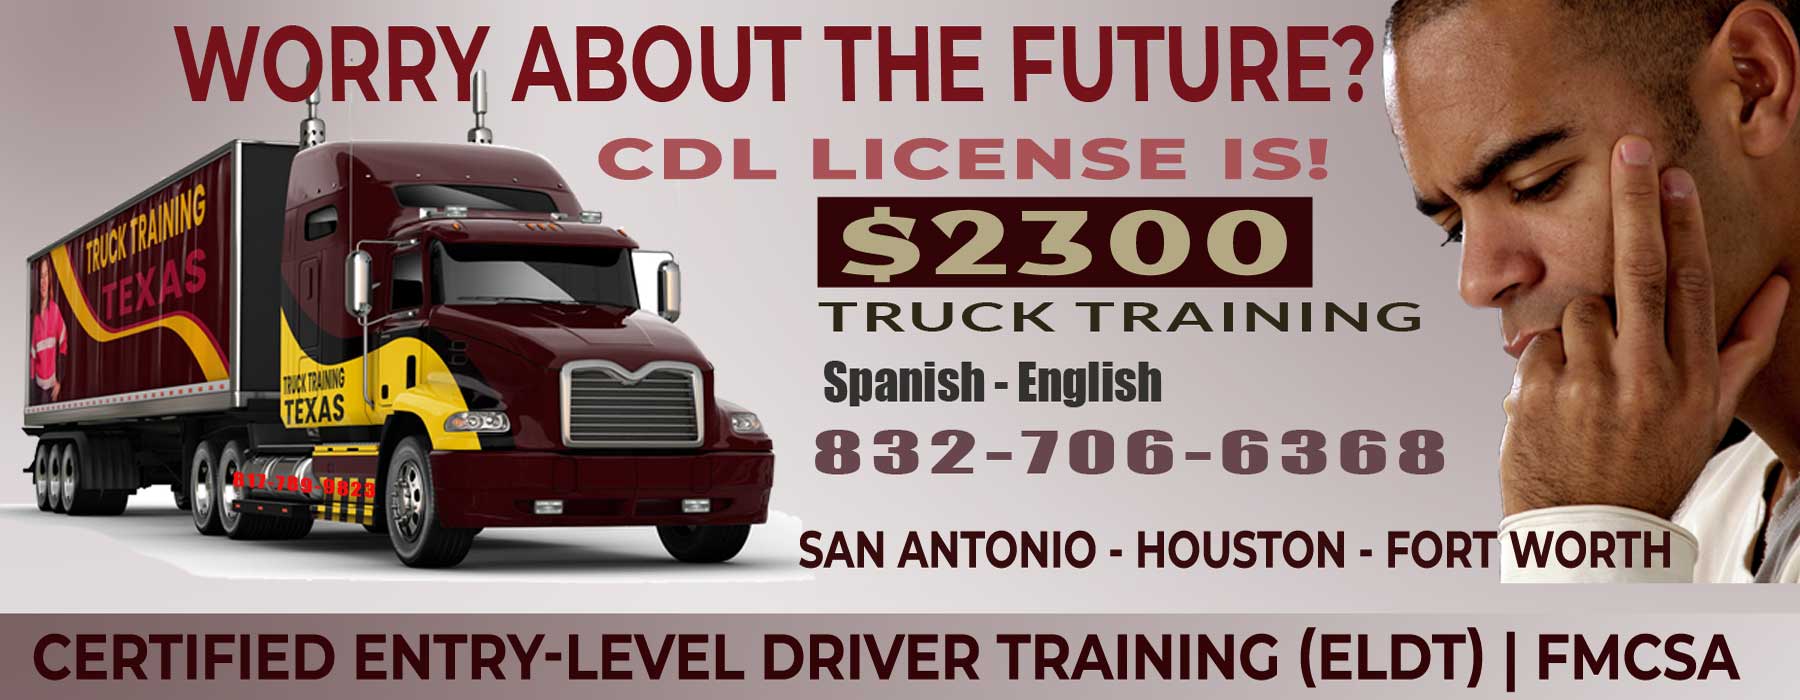 cdl training rosenberg texas image show services and phone